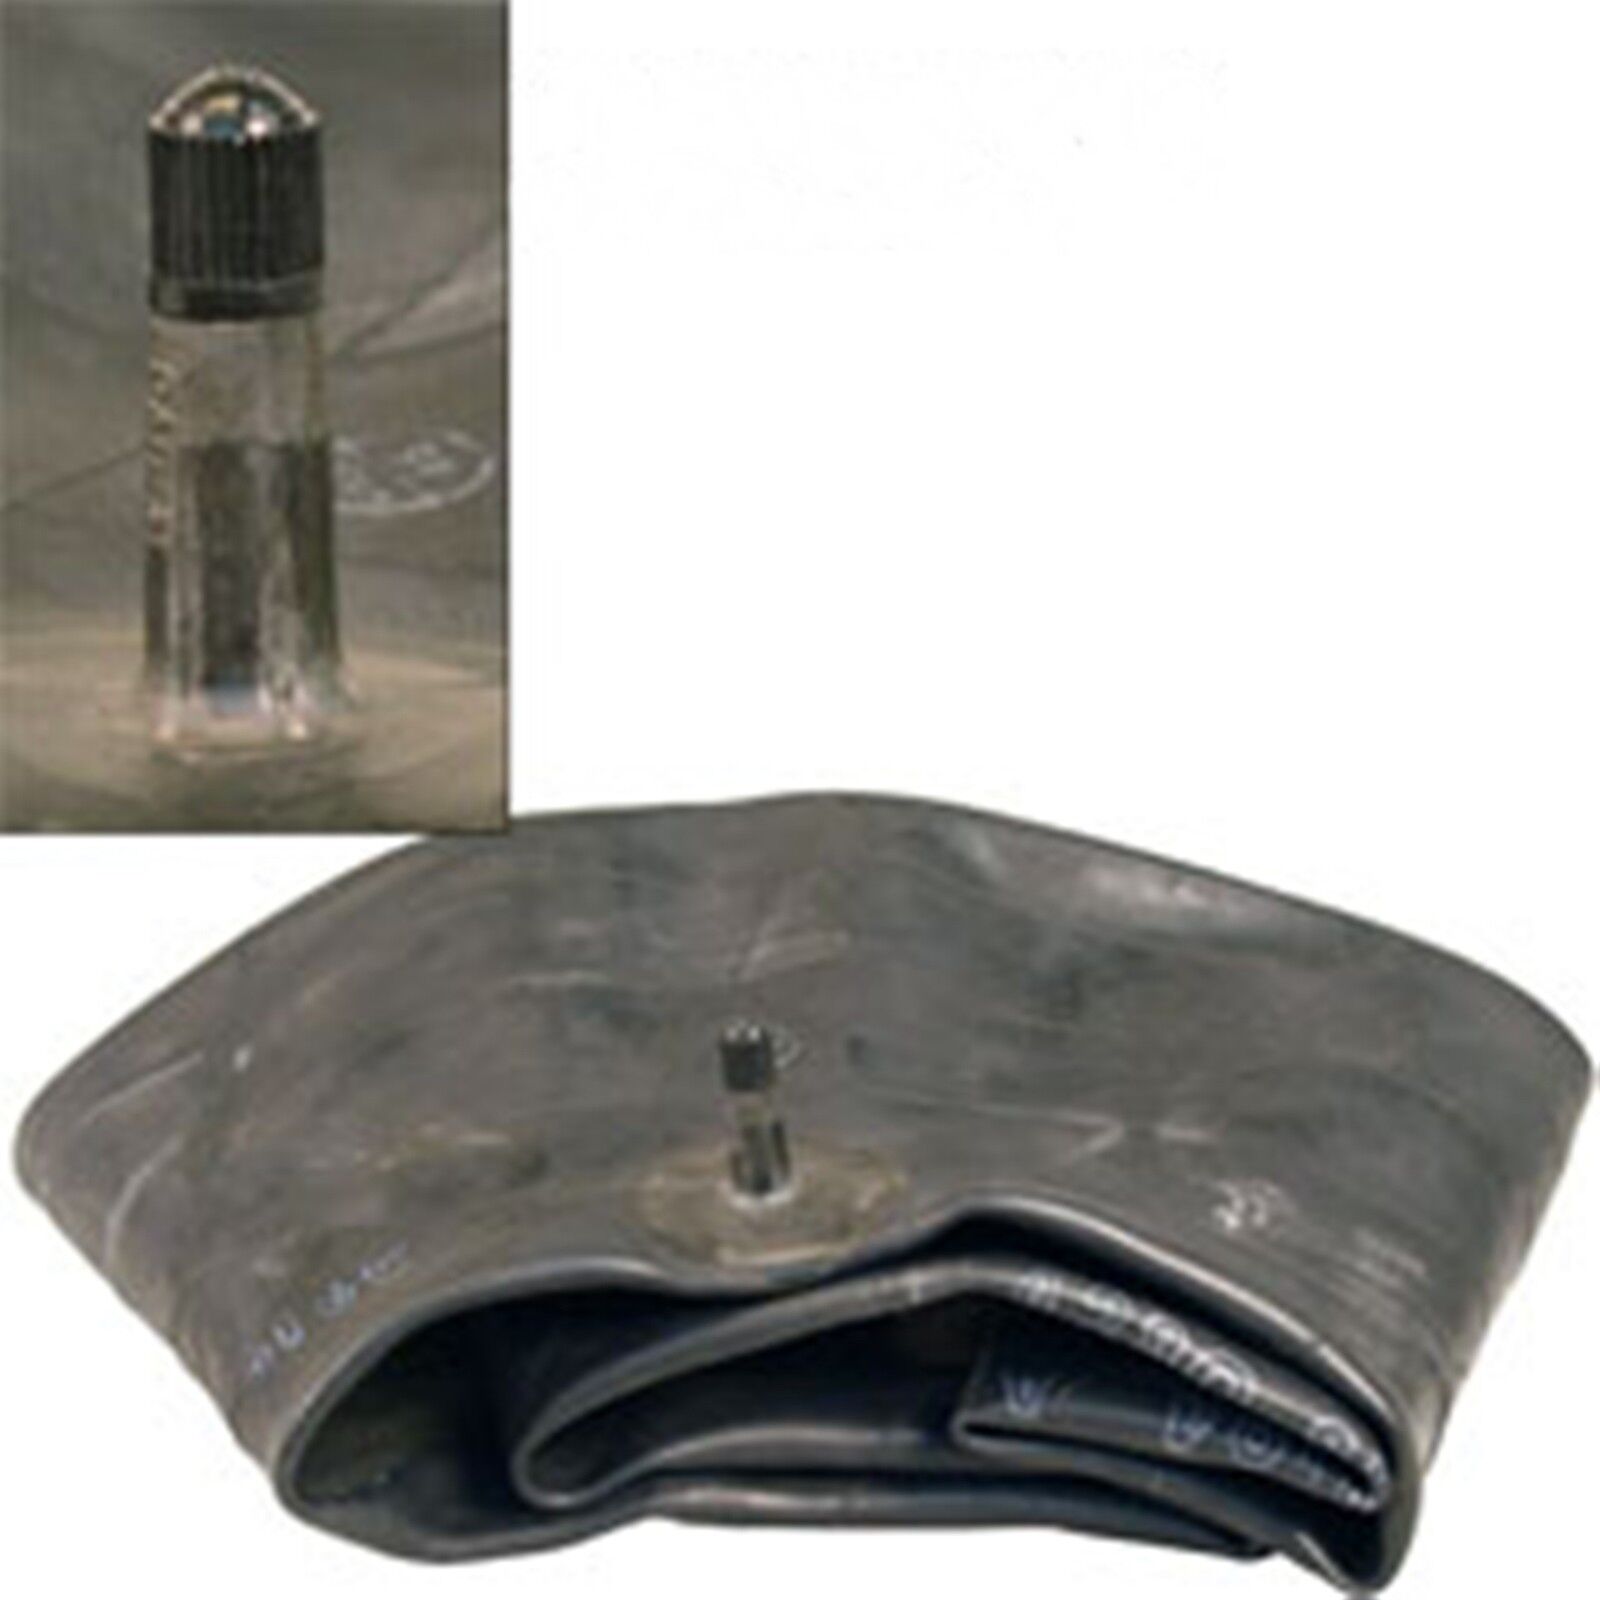 Tire Inner Tube fits 5.60-15 560-15 5.90-15 600-15 6.00-15 Radial and Bias FR-15